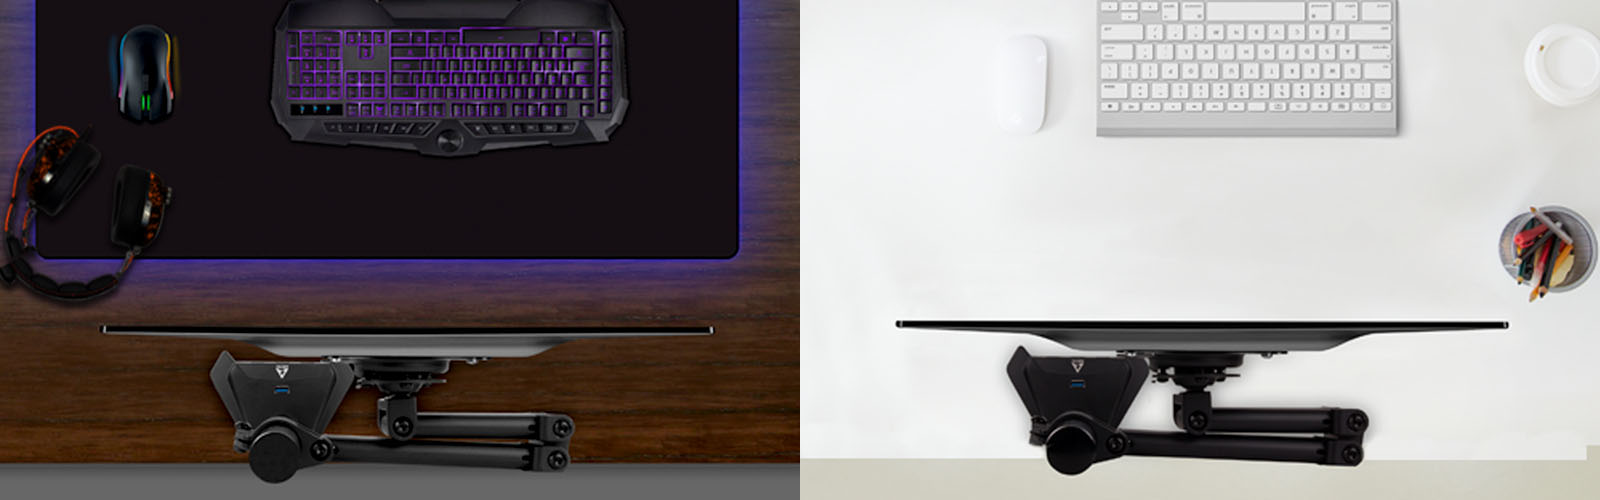 Z1 Pro (Gen 3) | Desk Mount Monitor Arm with SuperSpeed USB Hub 